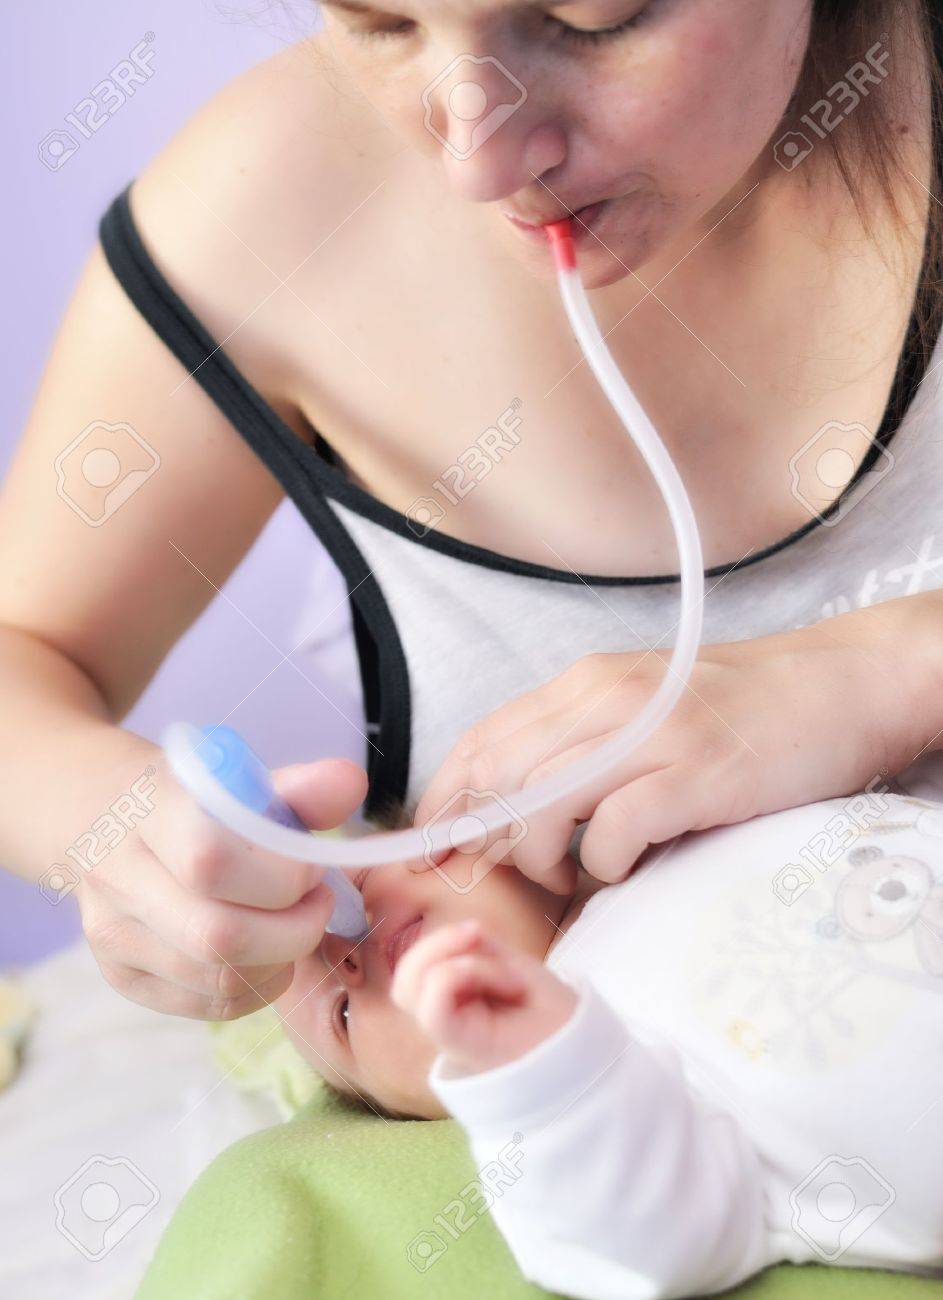 25086714-Mother-suction-catarrh-from-the-nose-her-baby-Stock-Photo-baby.jpg